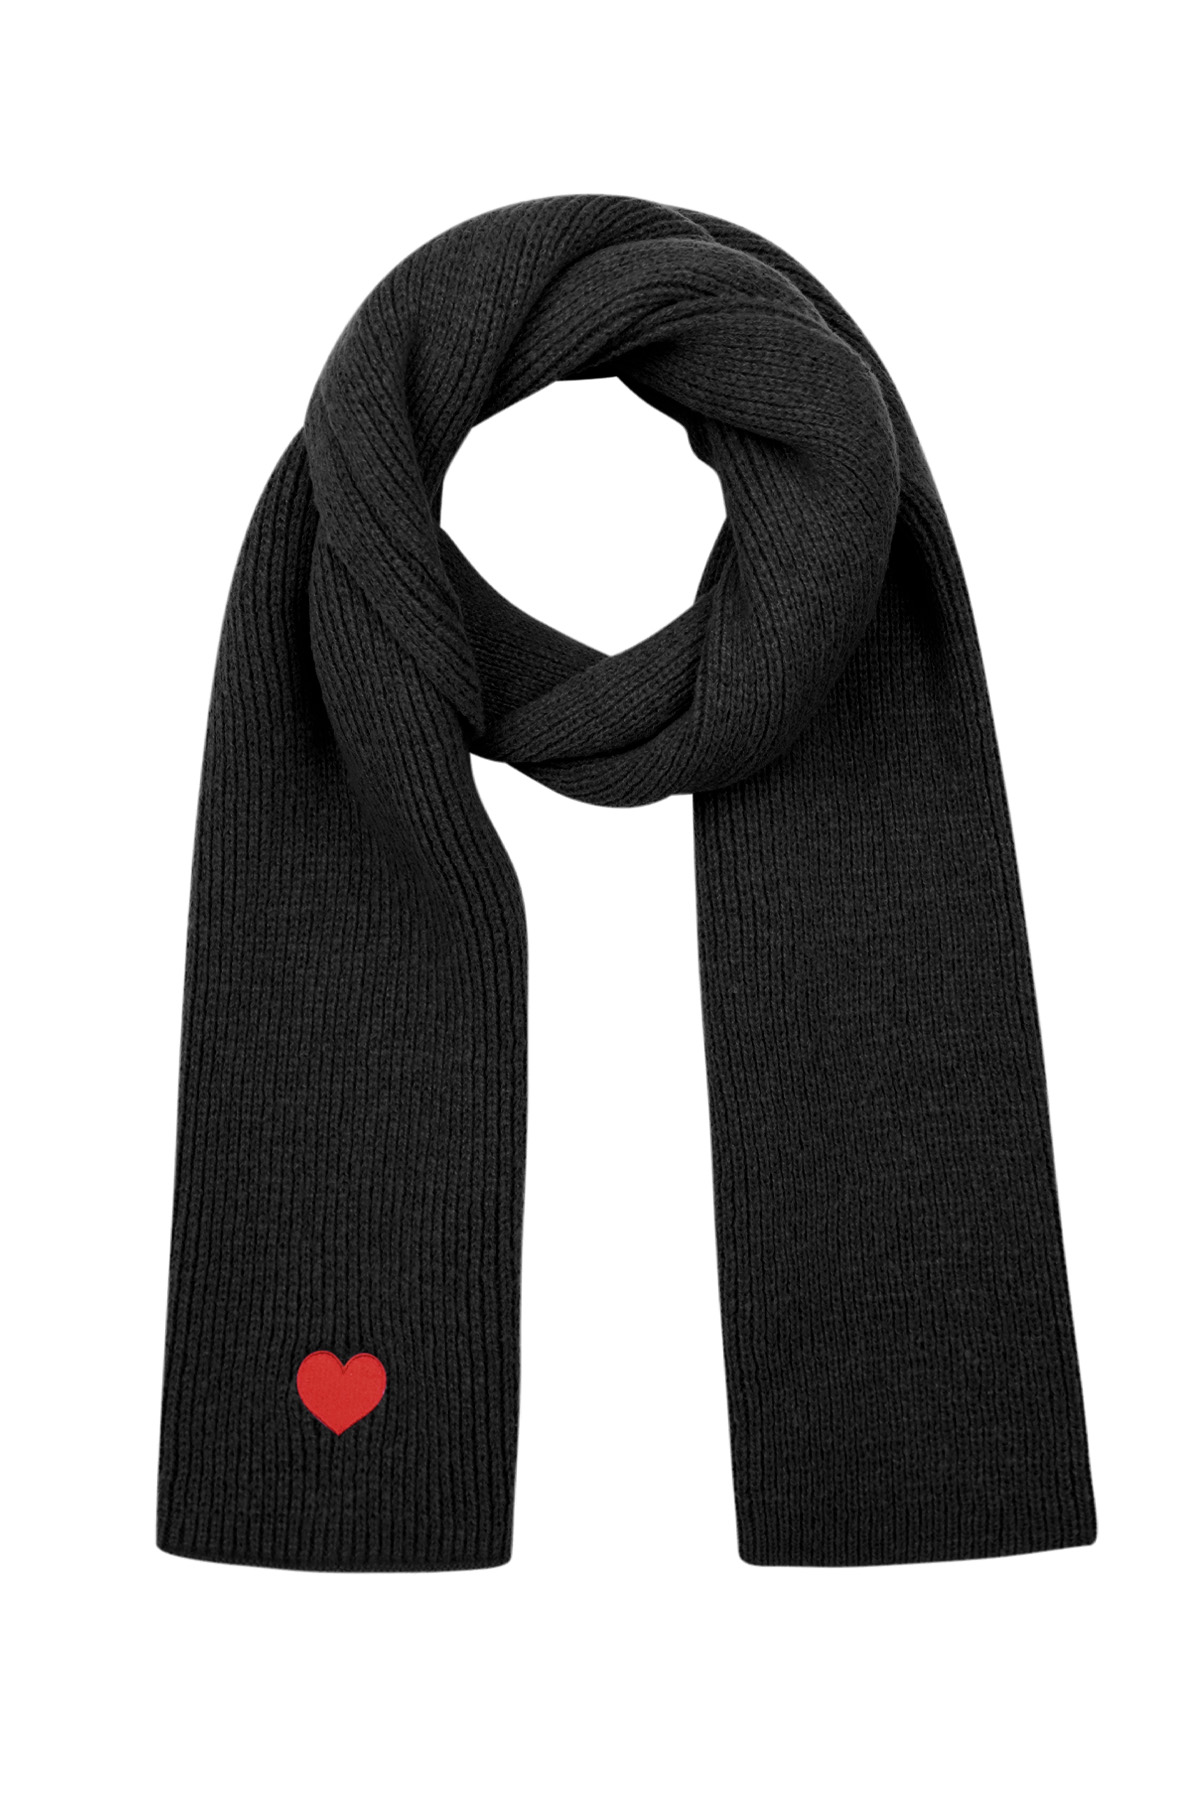 Winter scarf with heart detail - black h5 